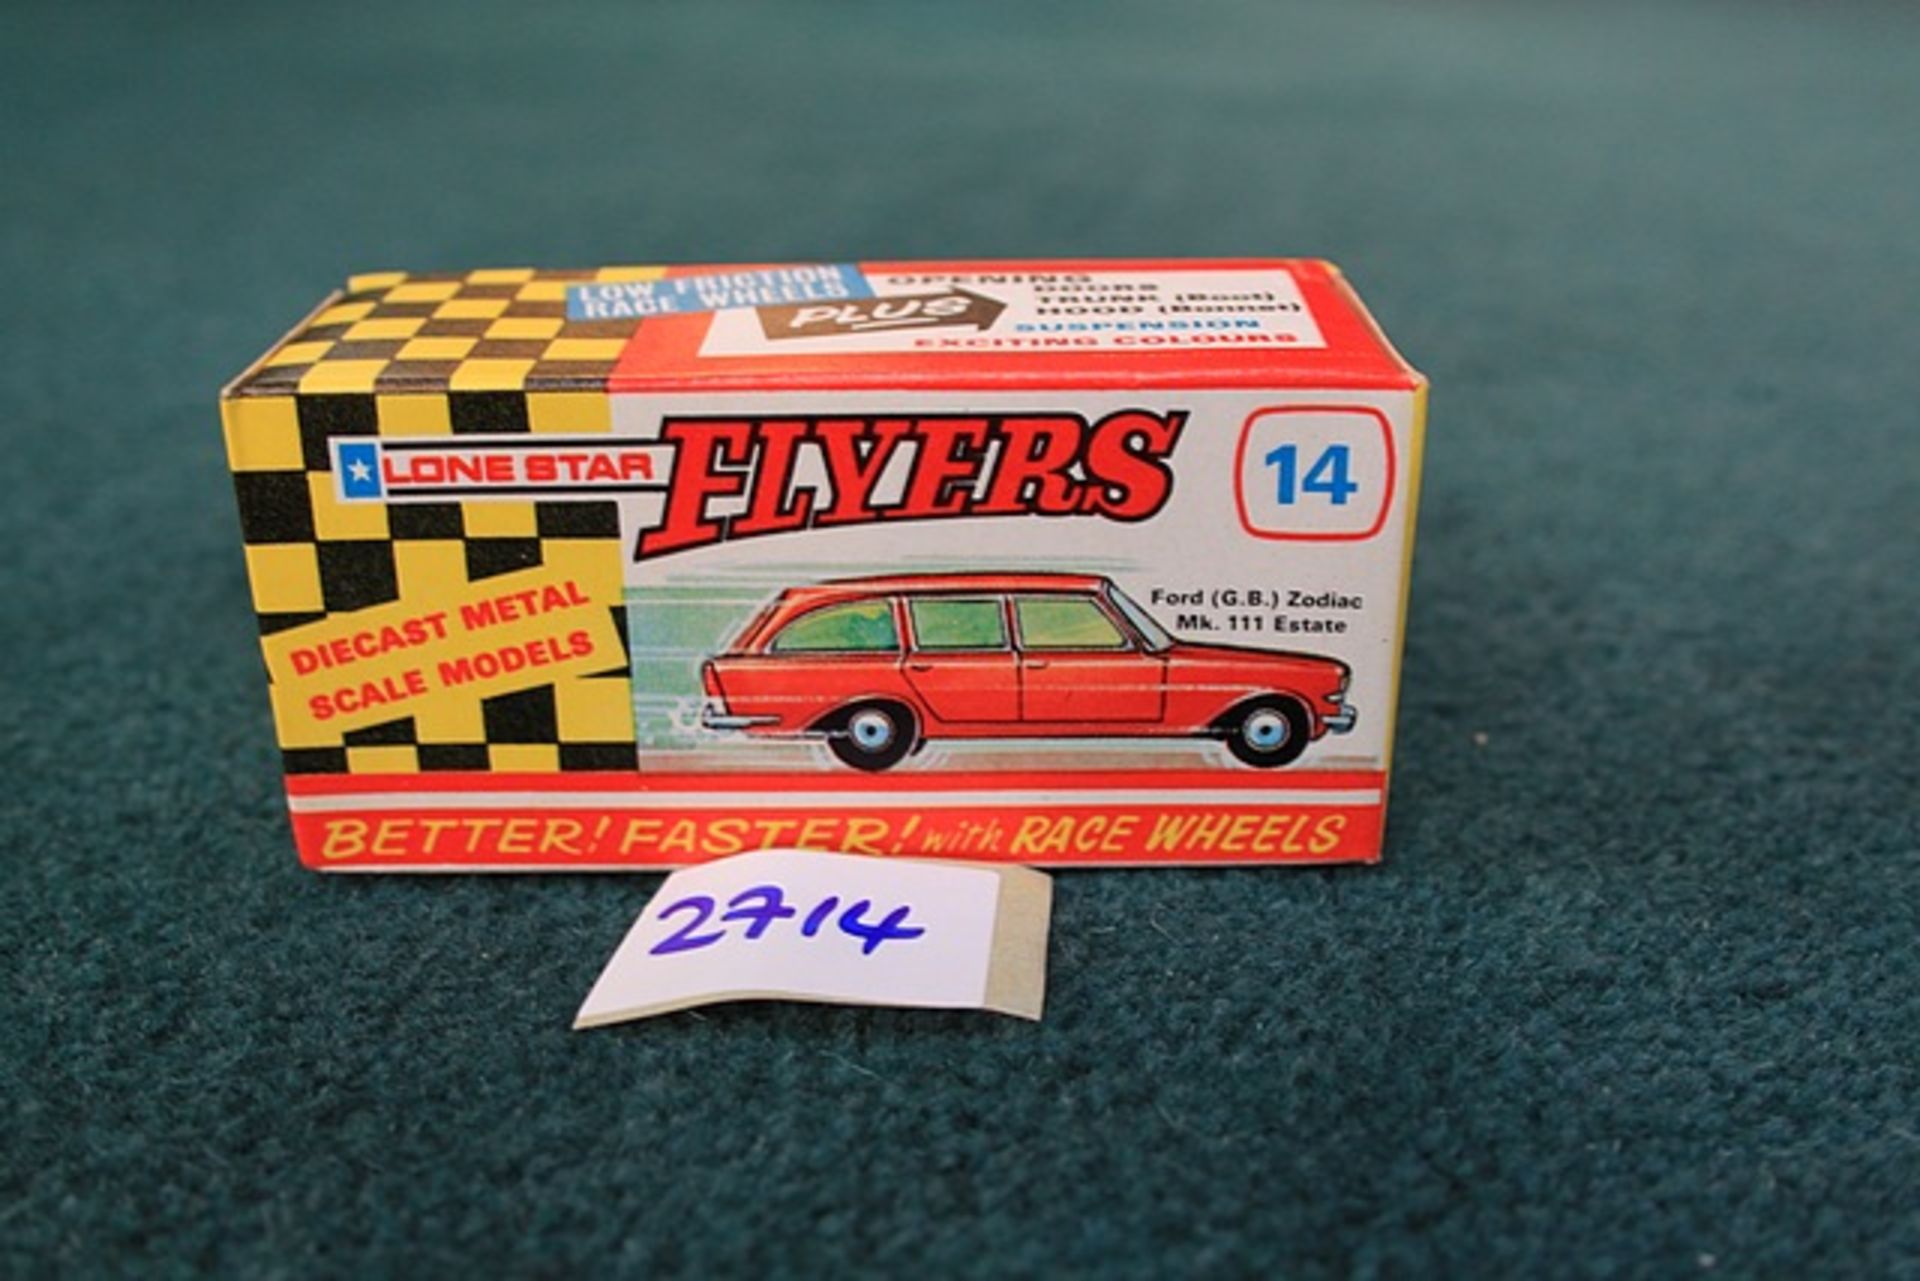 Lone Star Flyers #14 Diecast MKIII FORD ZODIAC ESTATE In Metallic Green And Green Interior With